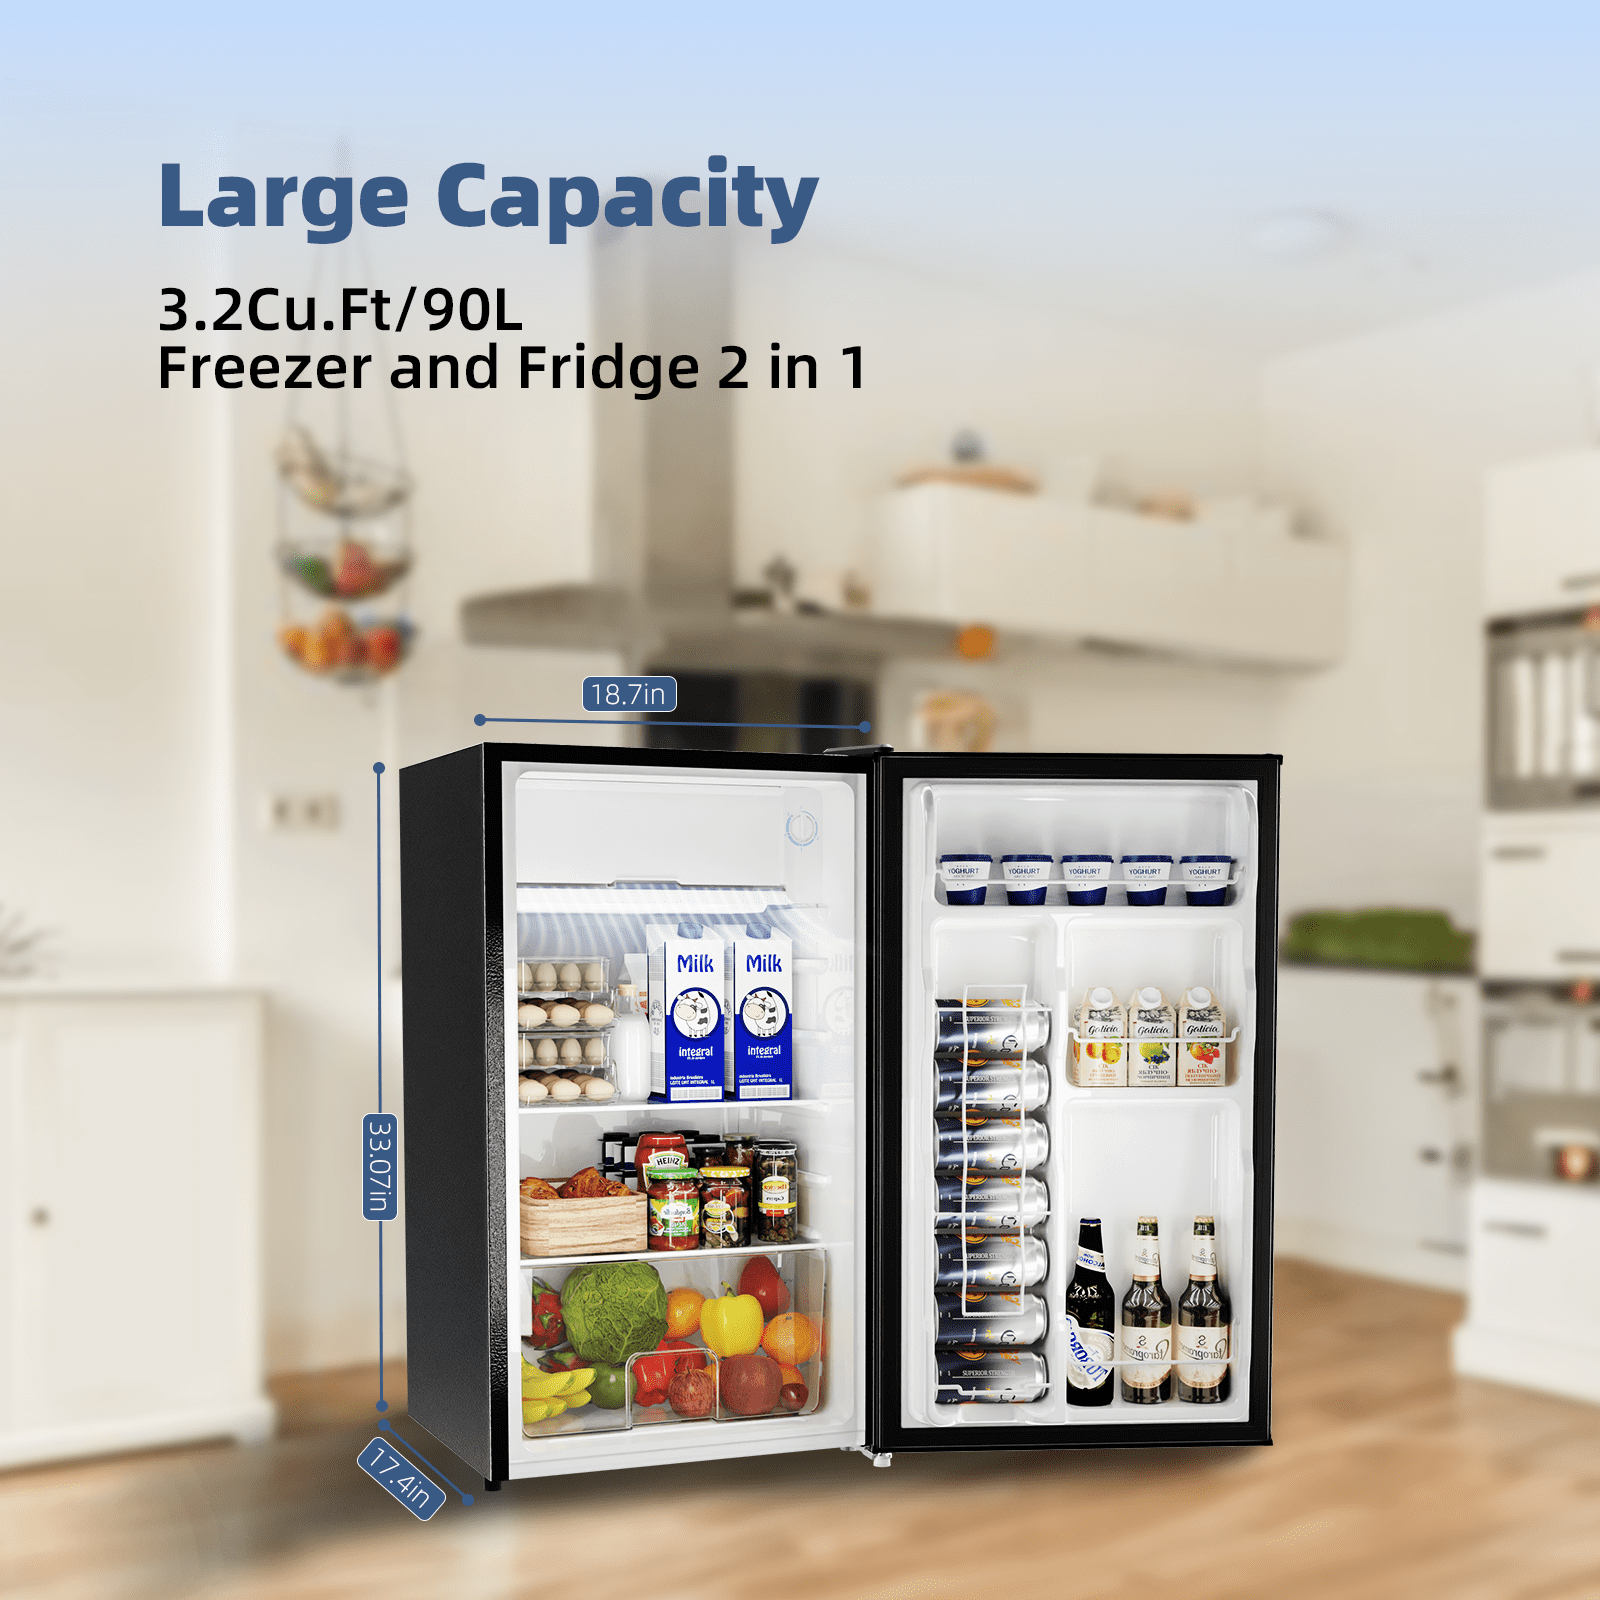  BANGSON Small Fridge with Freezer, 4.0 Cu.Ft, Samll  Refrigerator with Freezer, 5 Settings Temperature Adjustable, 2 Doors,  Compact Fridge for Apartment Bedroom Dorm and Office, Black : Appliances